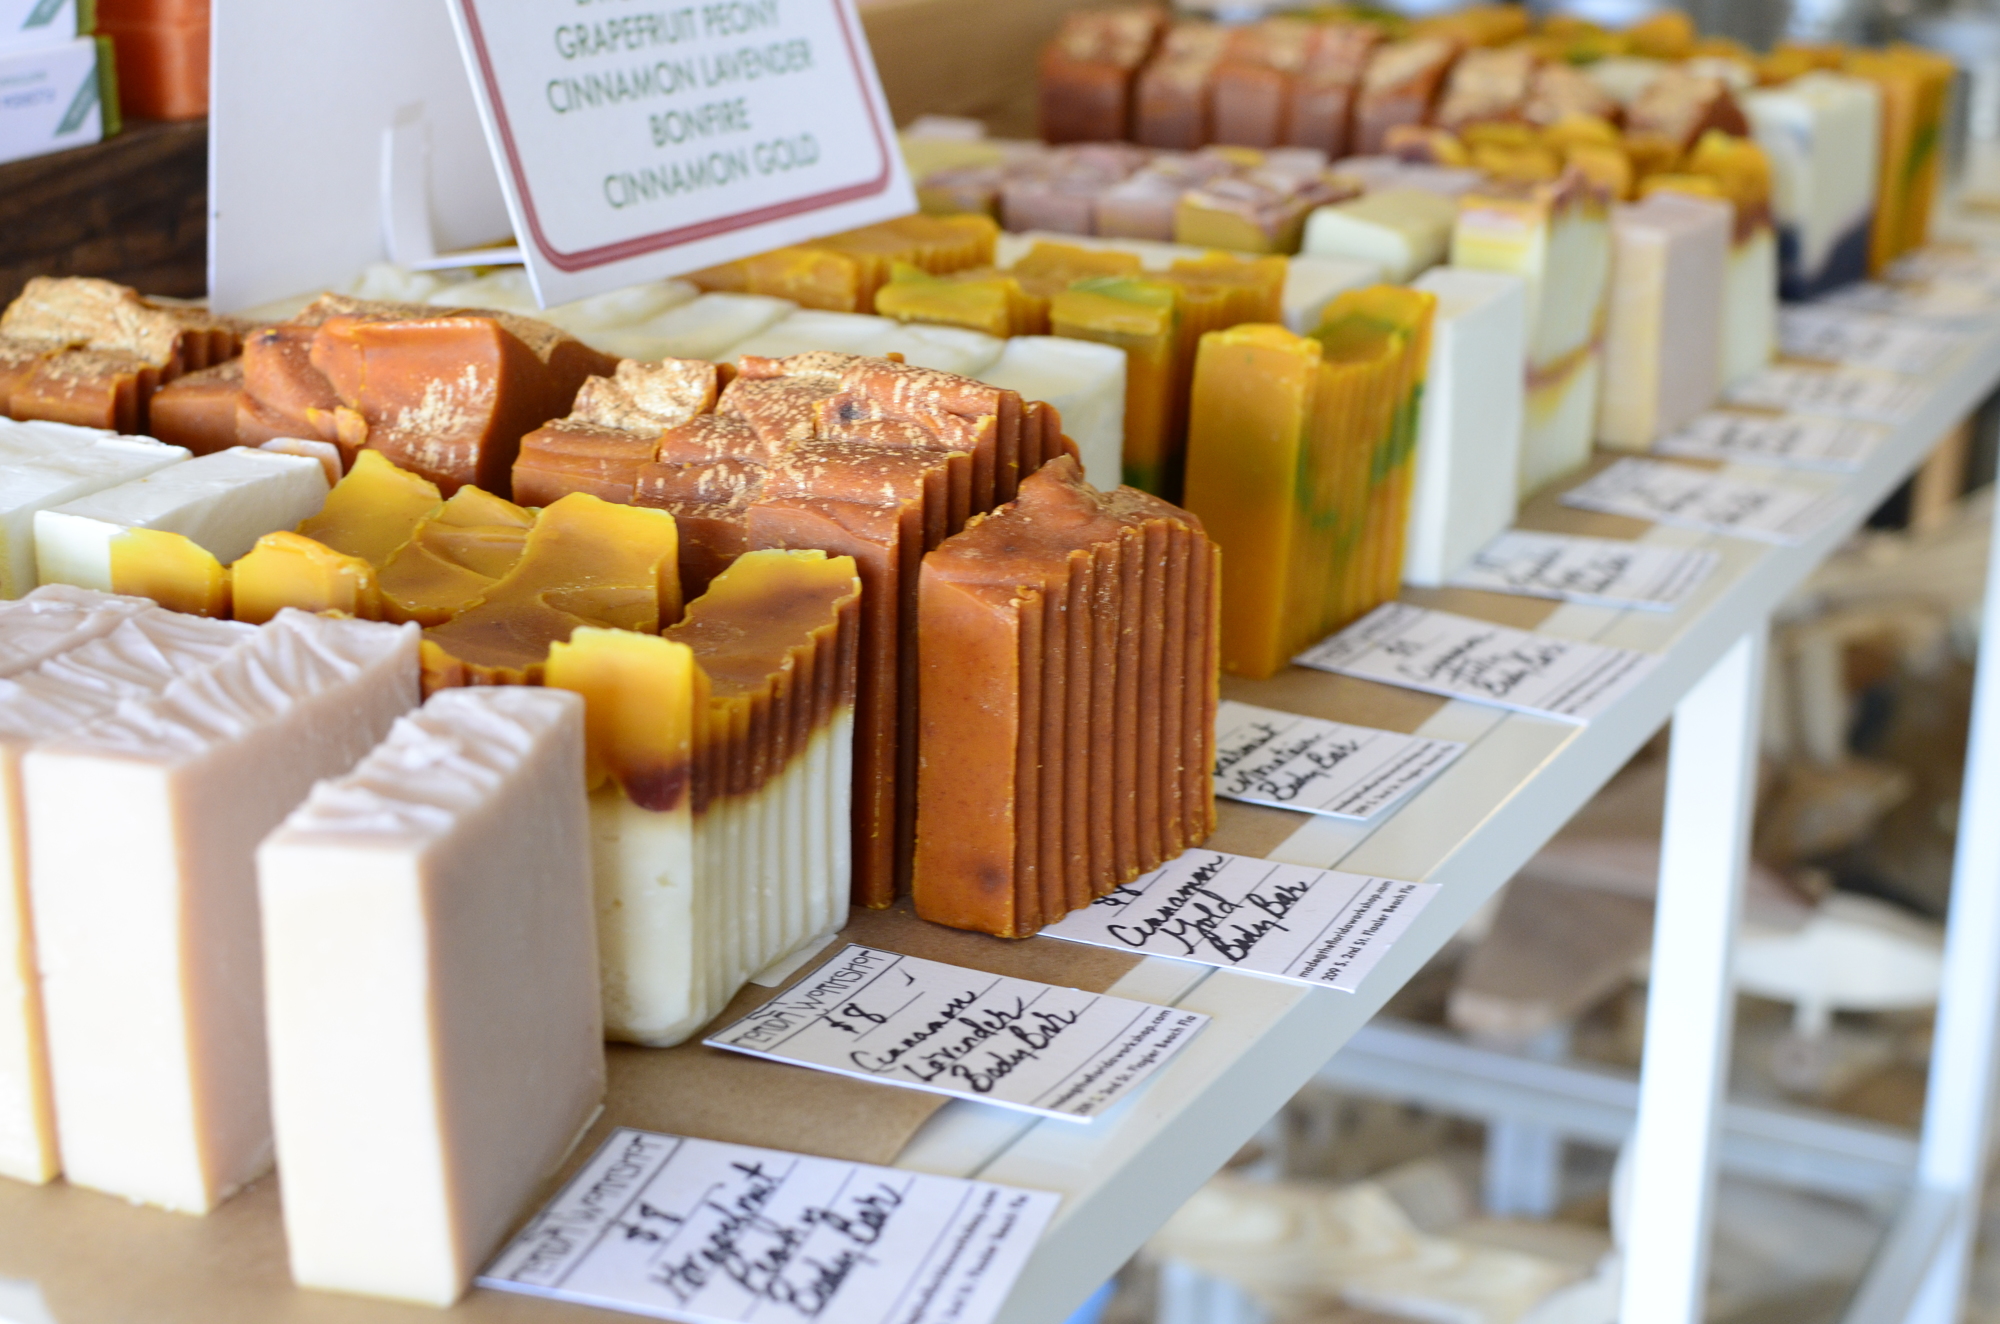 Delicious smelling handmade soaps featured at the Florida Workshop. Photo by Anastasia Pagello